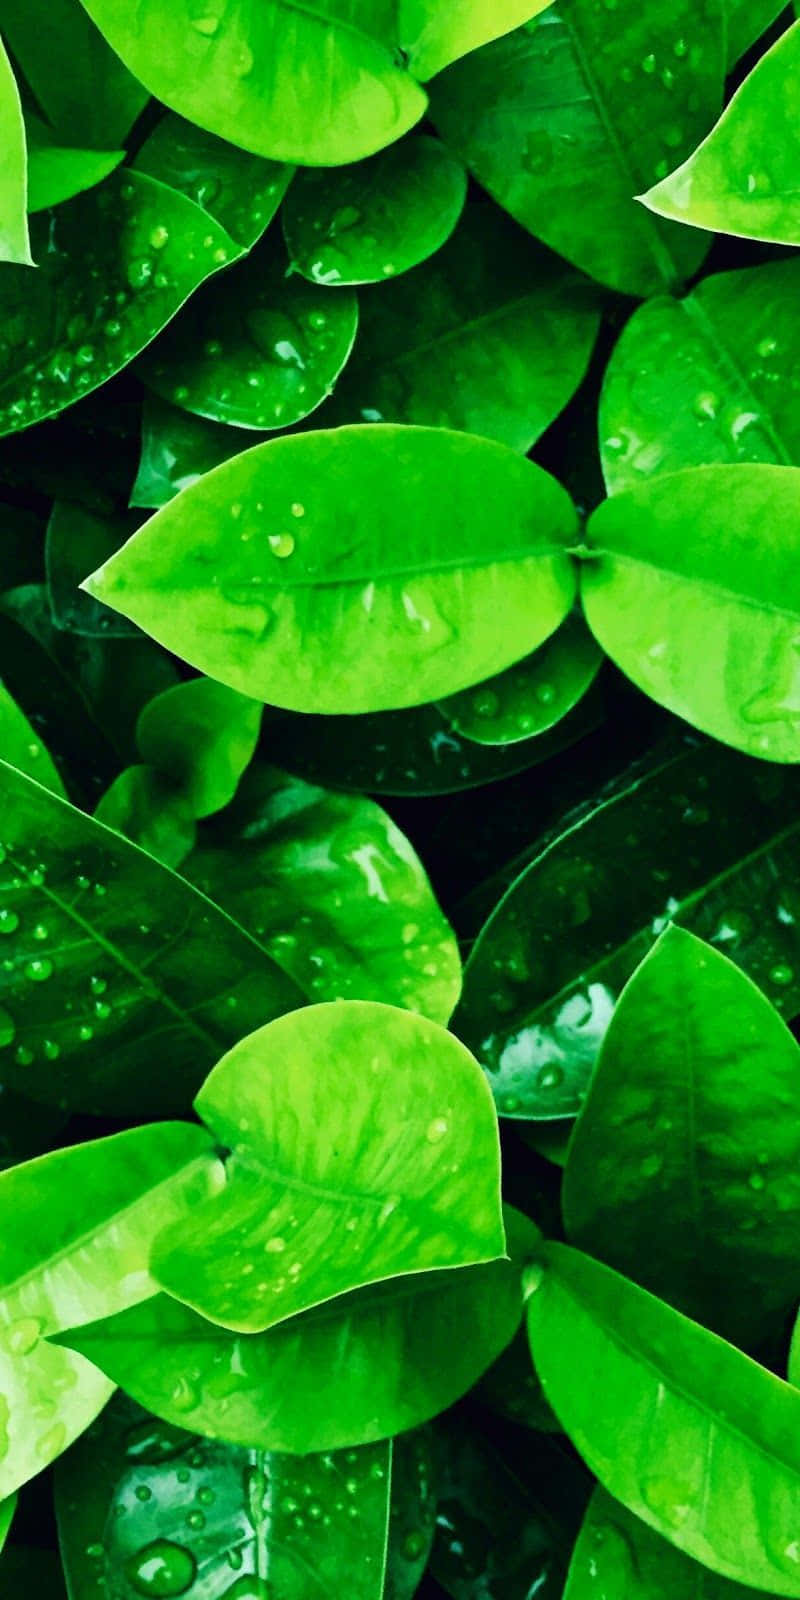 Enjoy Nature Anywhere with a Green Nature Iphone Wallpaper